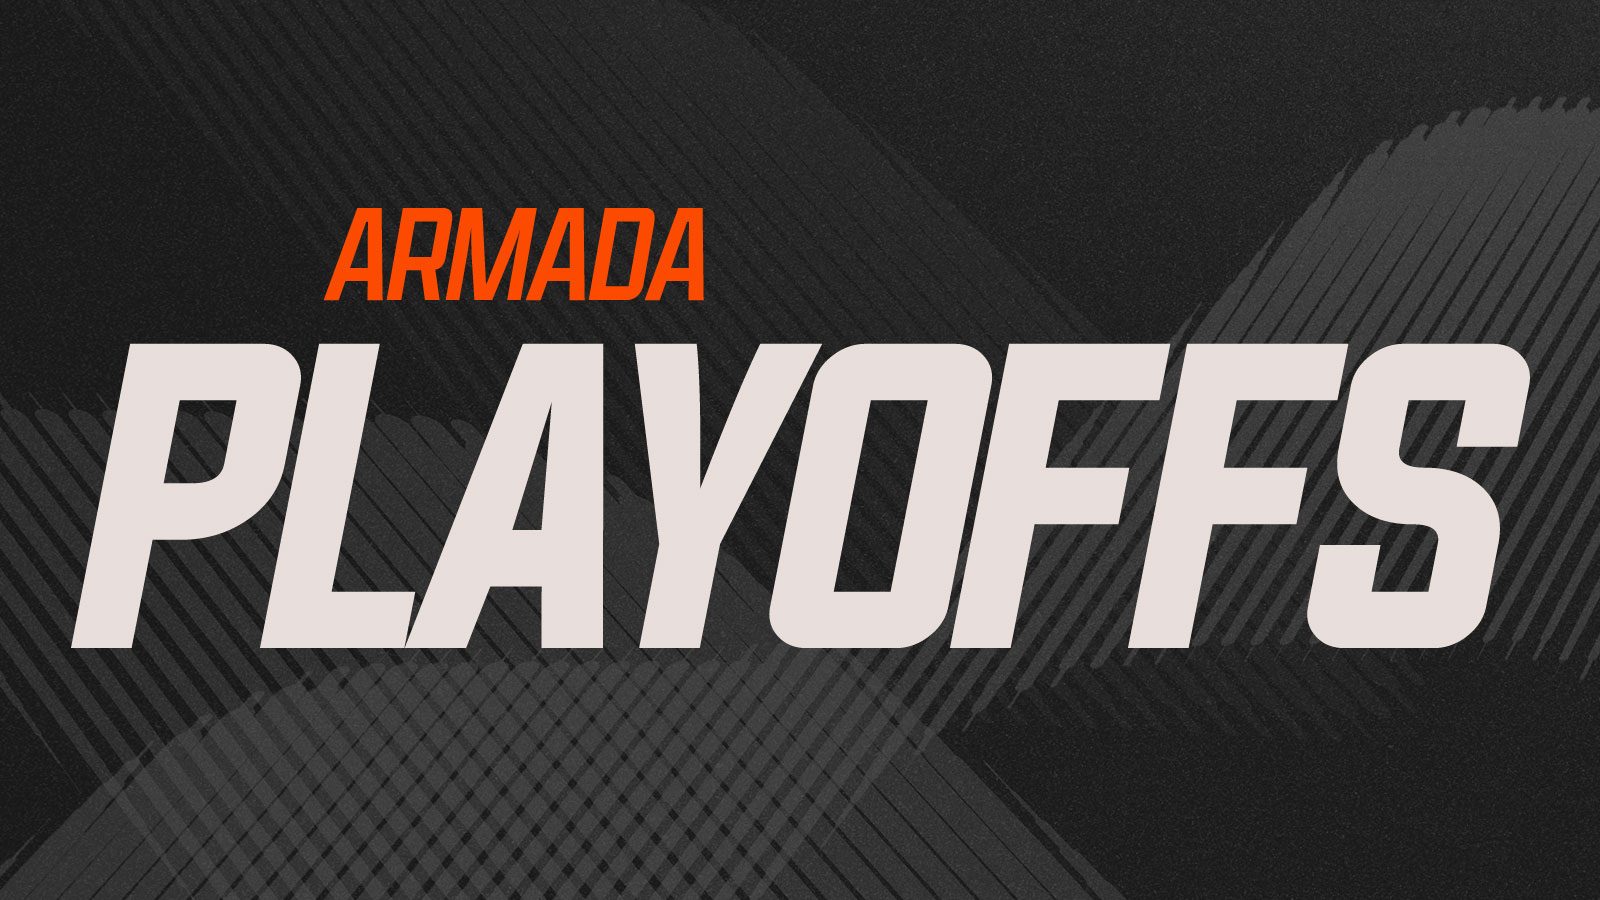 A graphic with a black background and Armada Playoffs written in orange and white.